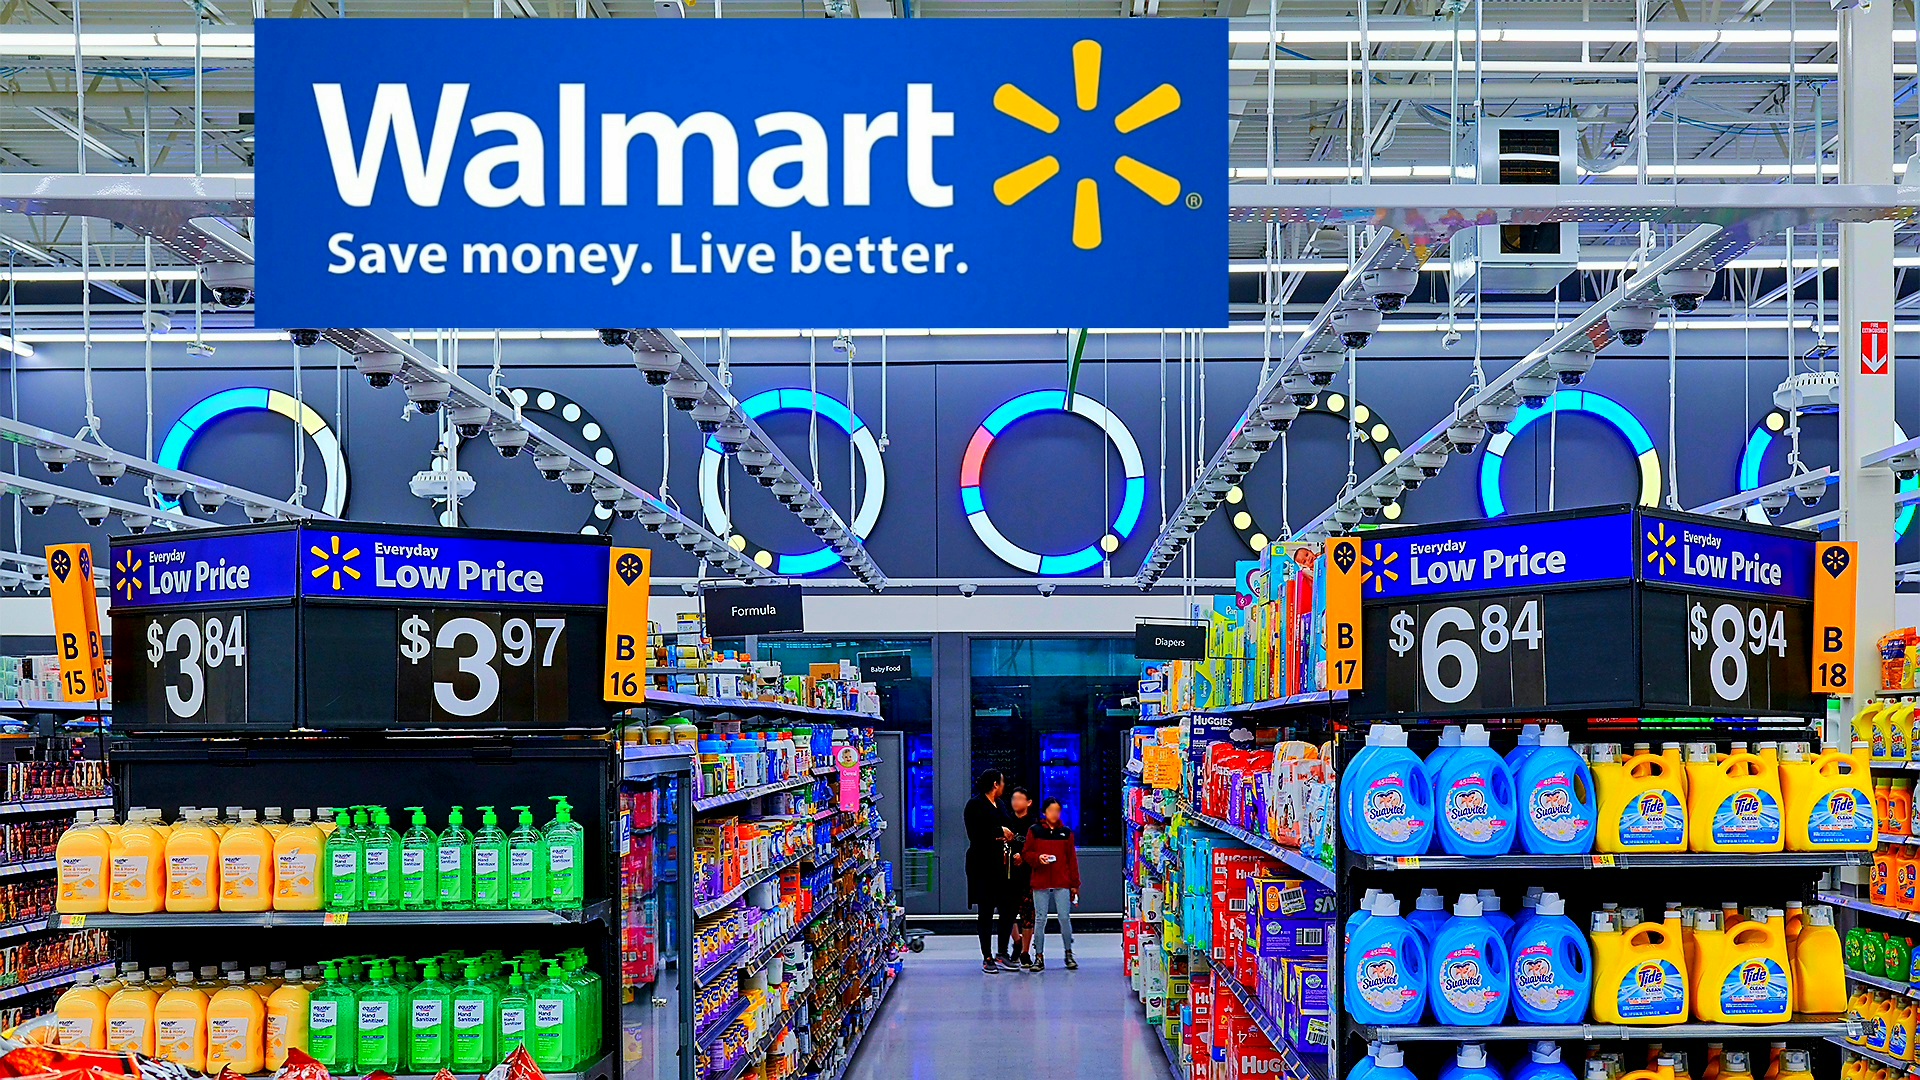 These are the stores of the future that Wal-Mart is expanding in the United States